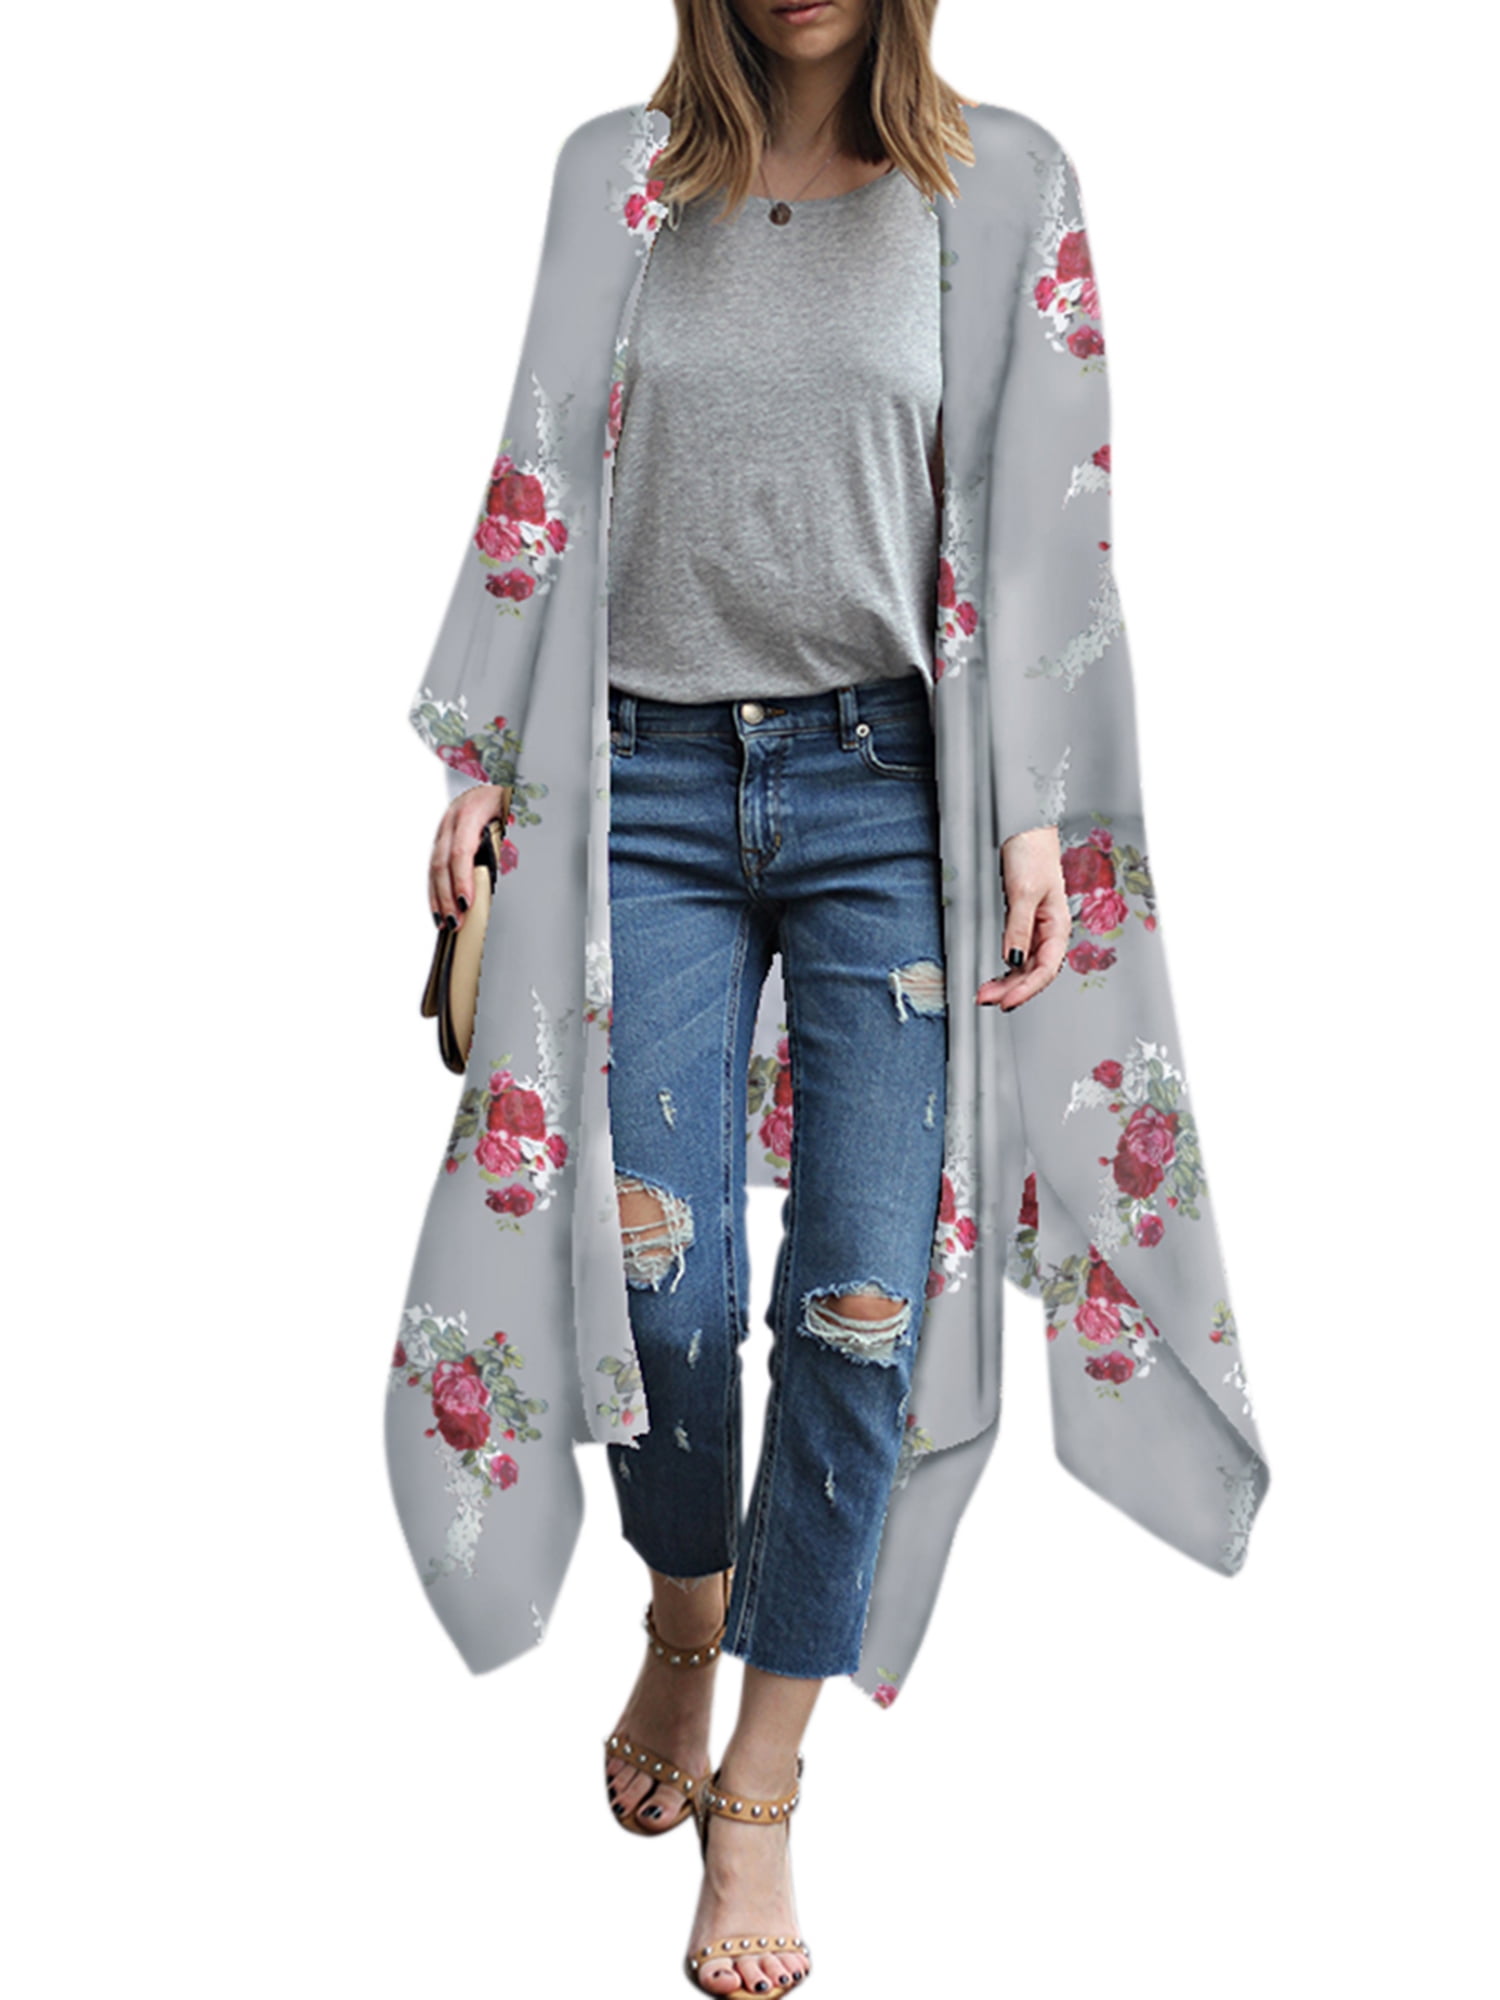 STYLEWORD Women's Loose Floral Print Chiffon Kimono Cardigan Sheer Capes Casual Tops Beach Cover Ups 